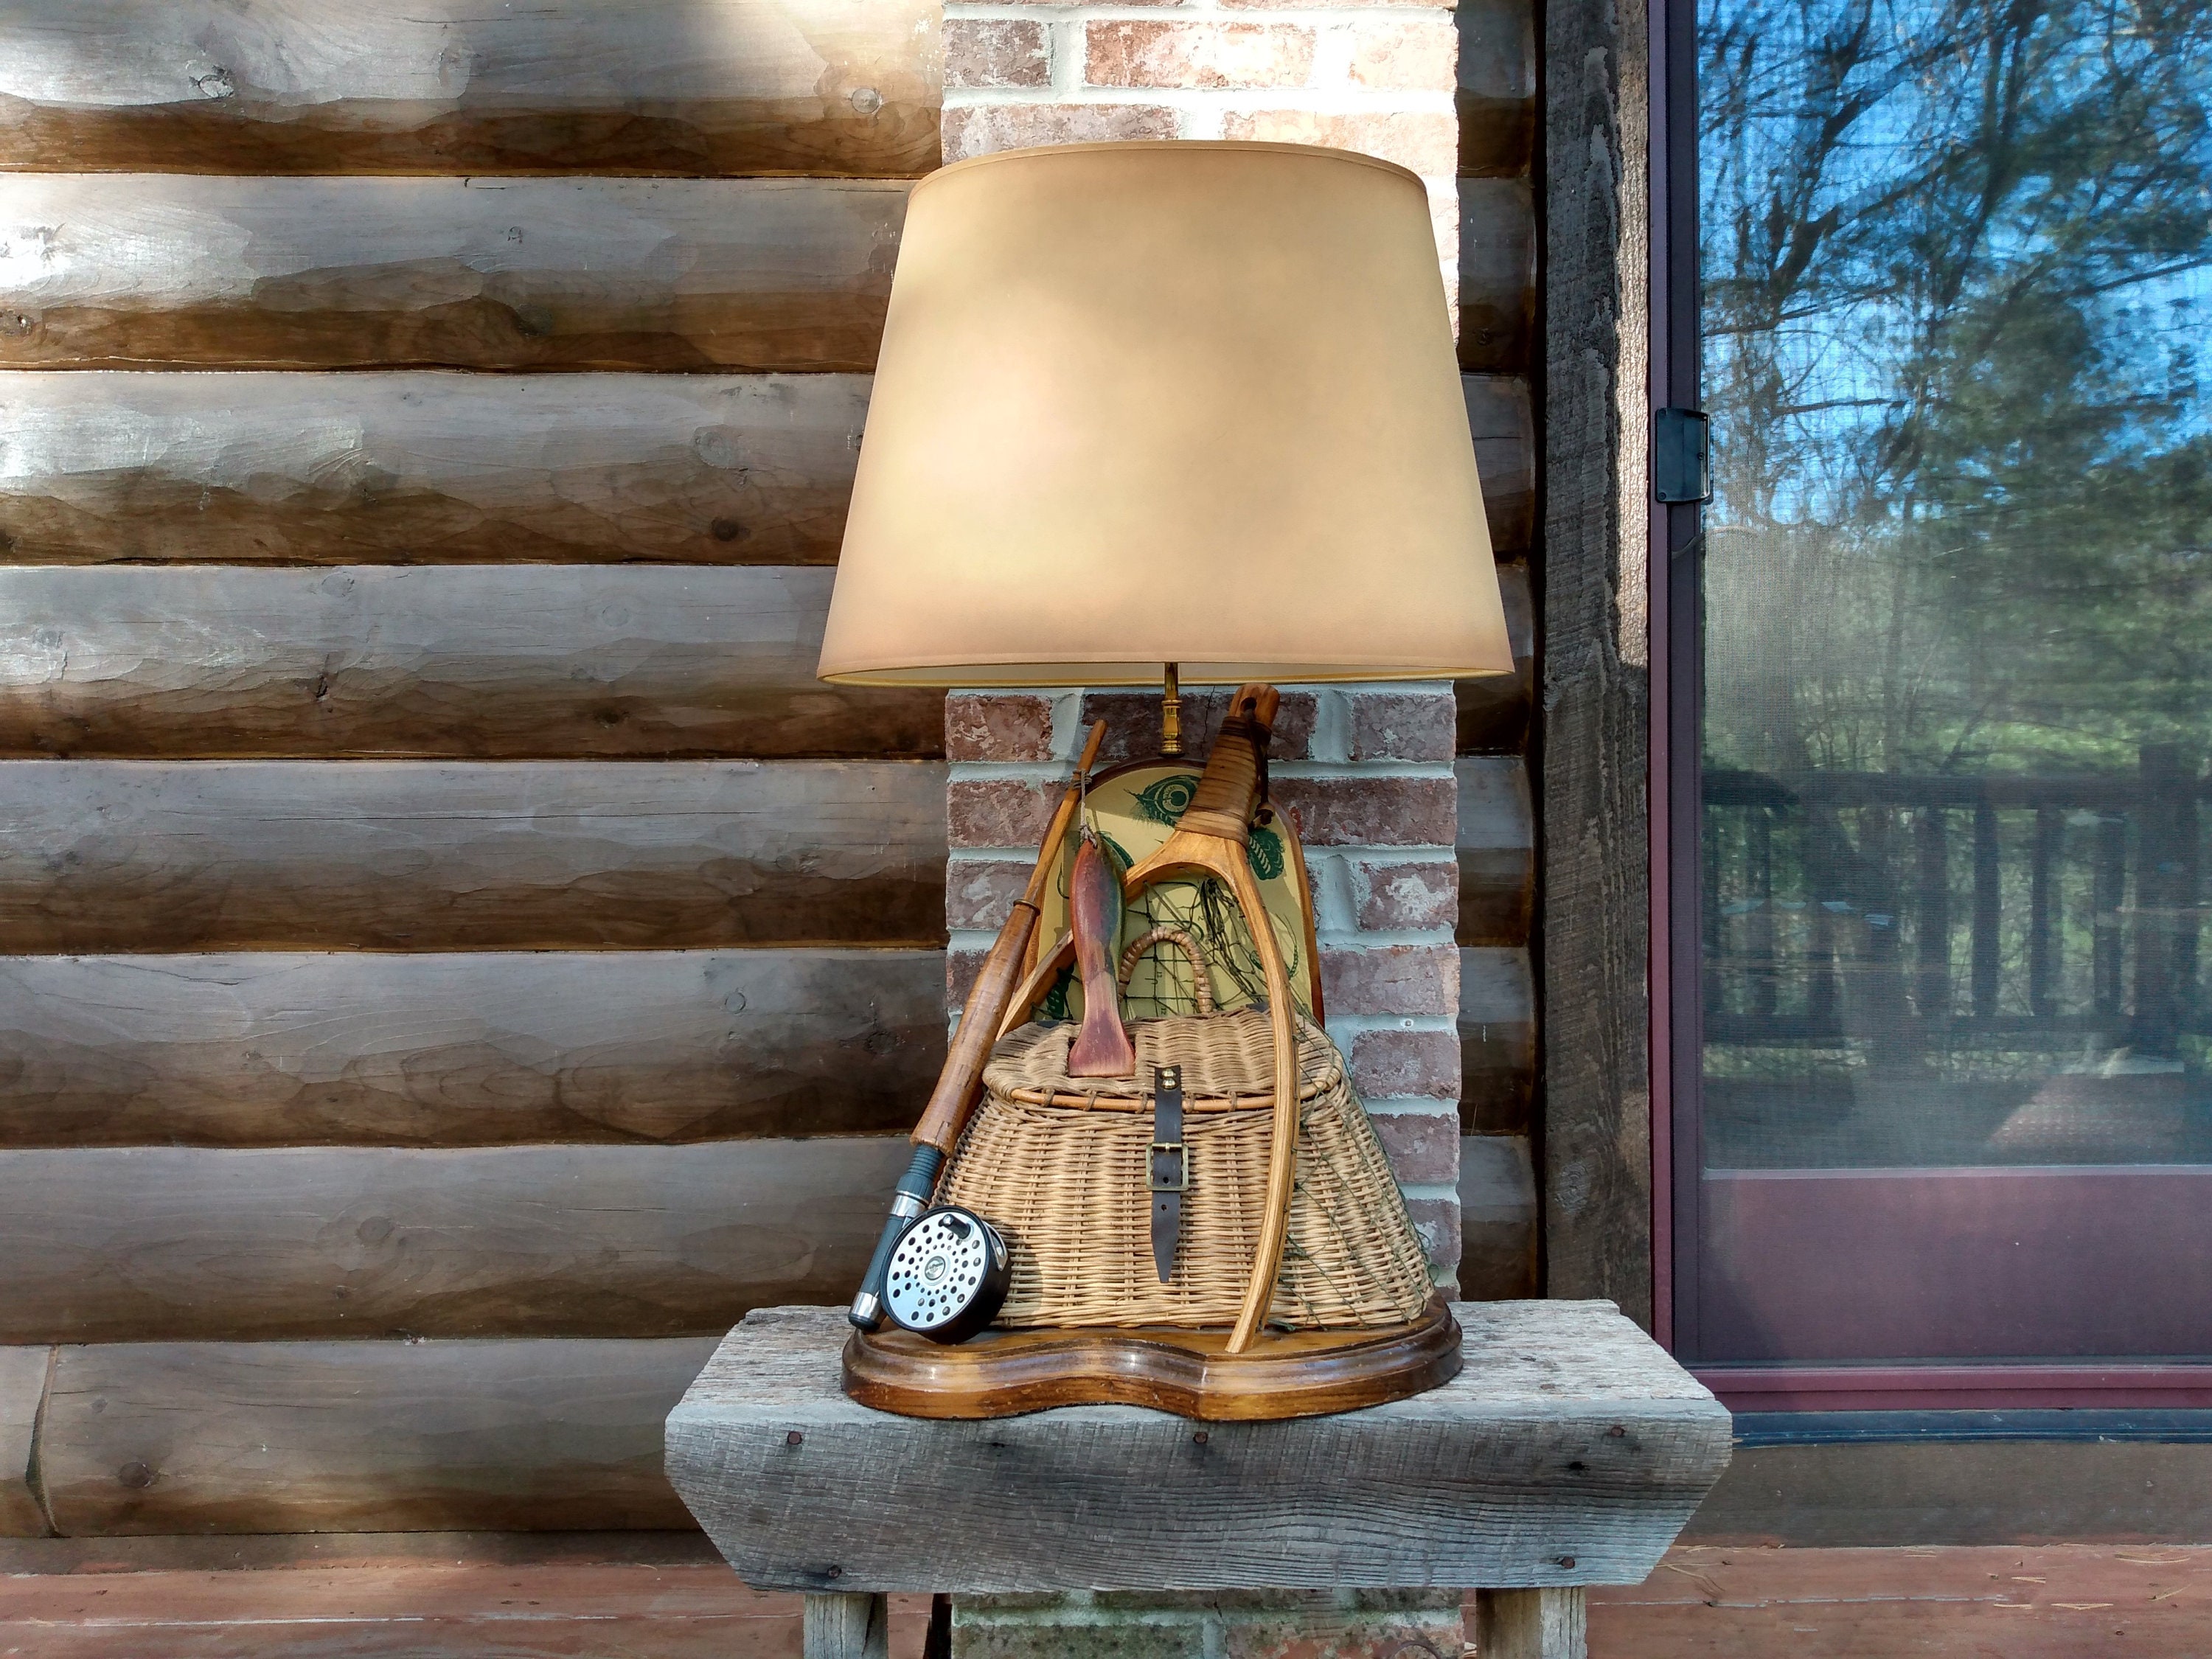 Vintage Nightwatch Fly Fishing Table Lamp - Rod Reel Creel Trout Net Fish  Design Lake Cabin Rustic Lodge Electric Wood Accent Light & Shade